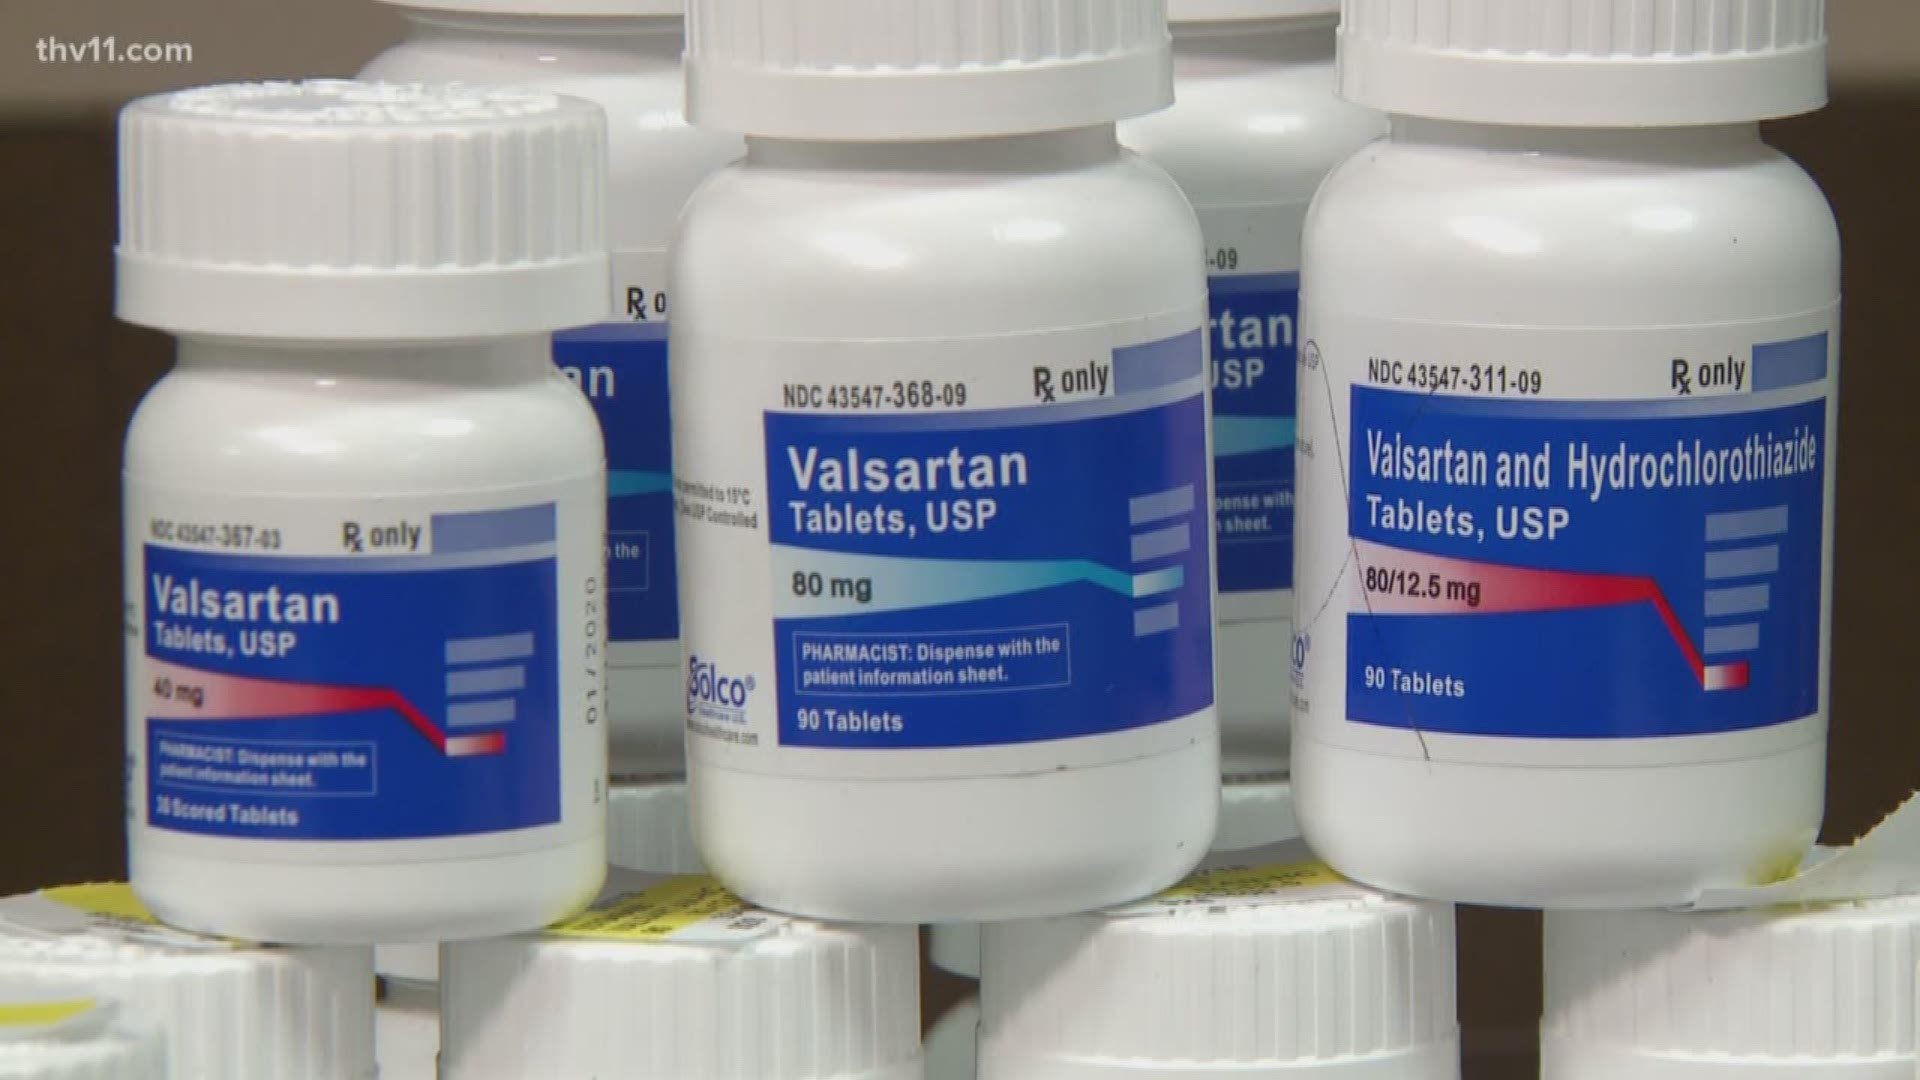 Not all brands of Valsartan have been recalled, but it's pertinent to check if your medicines.